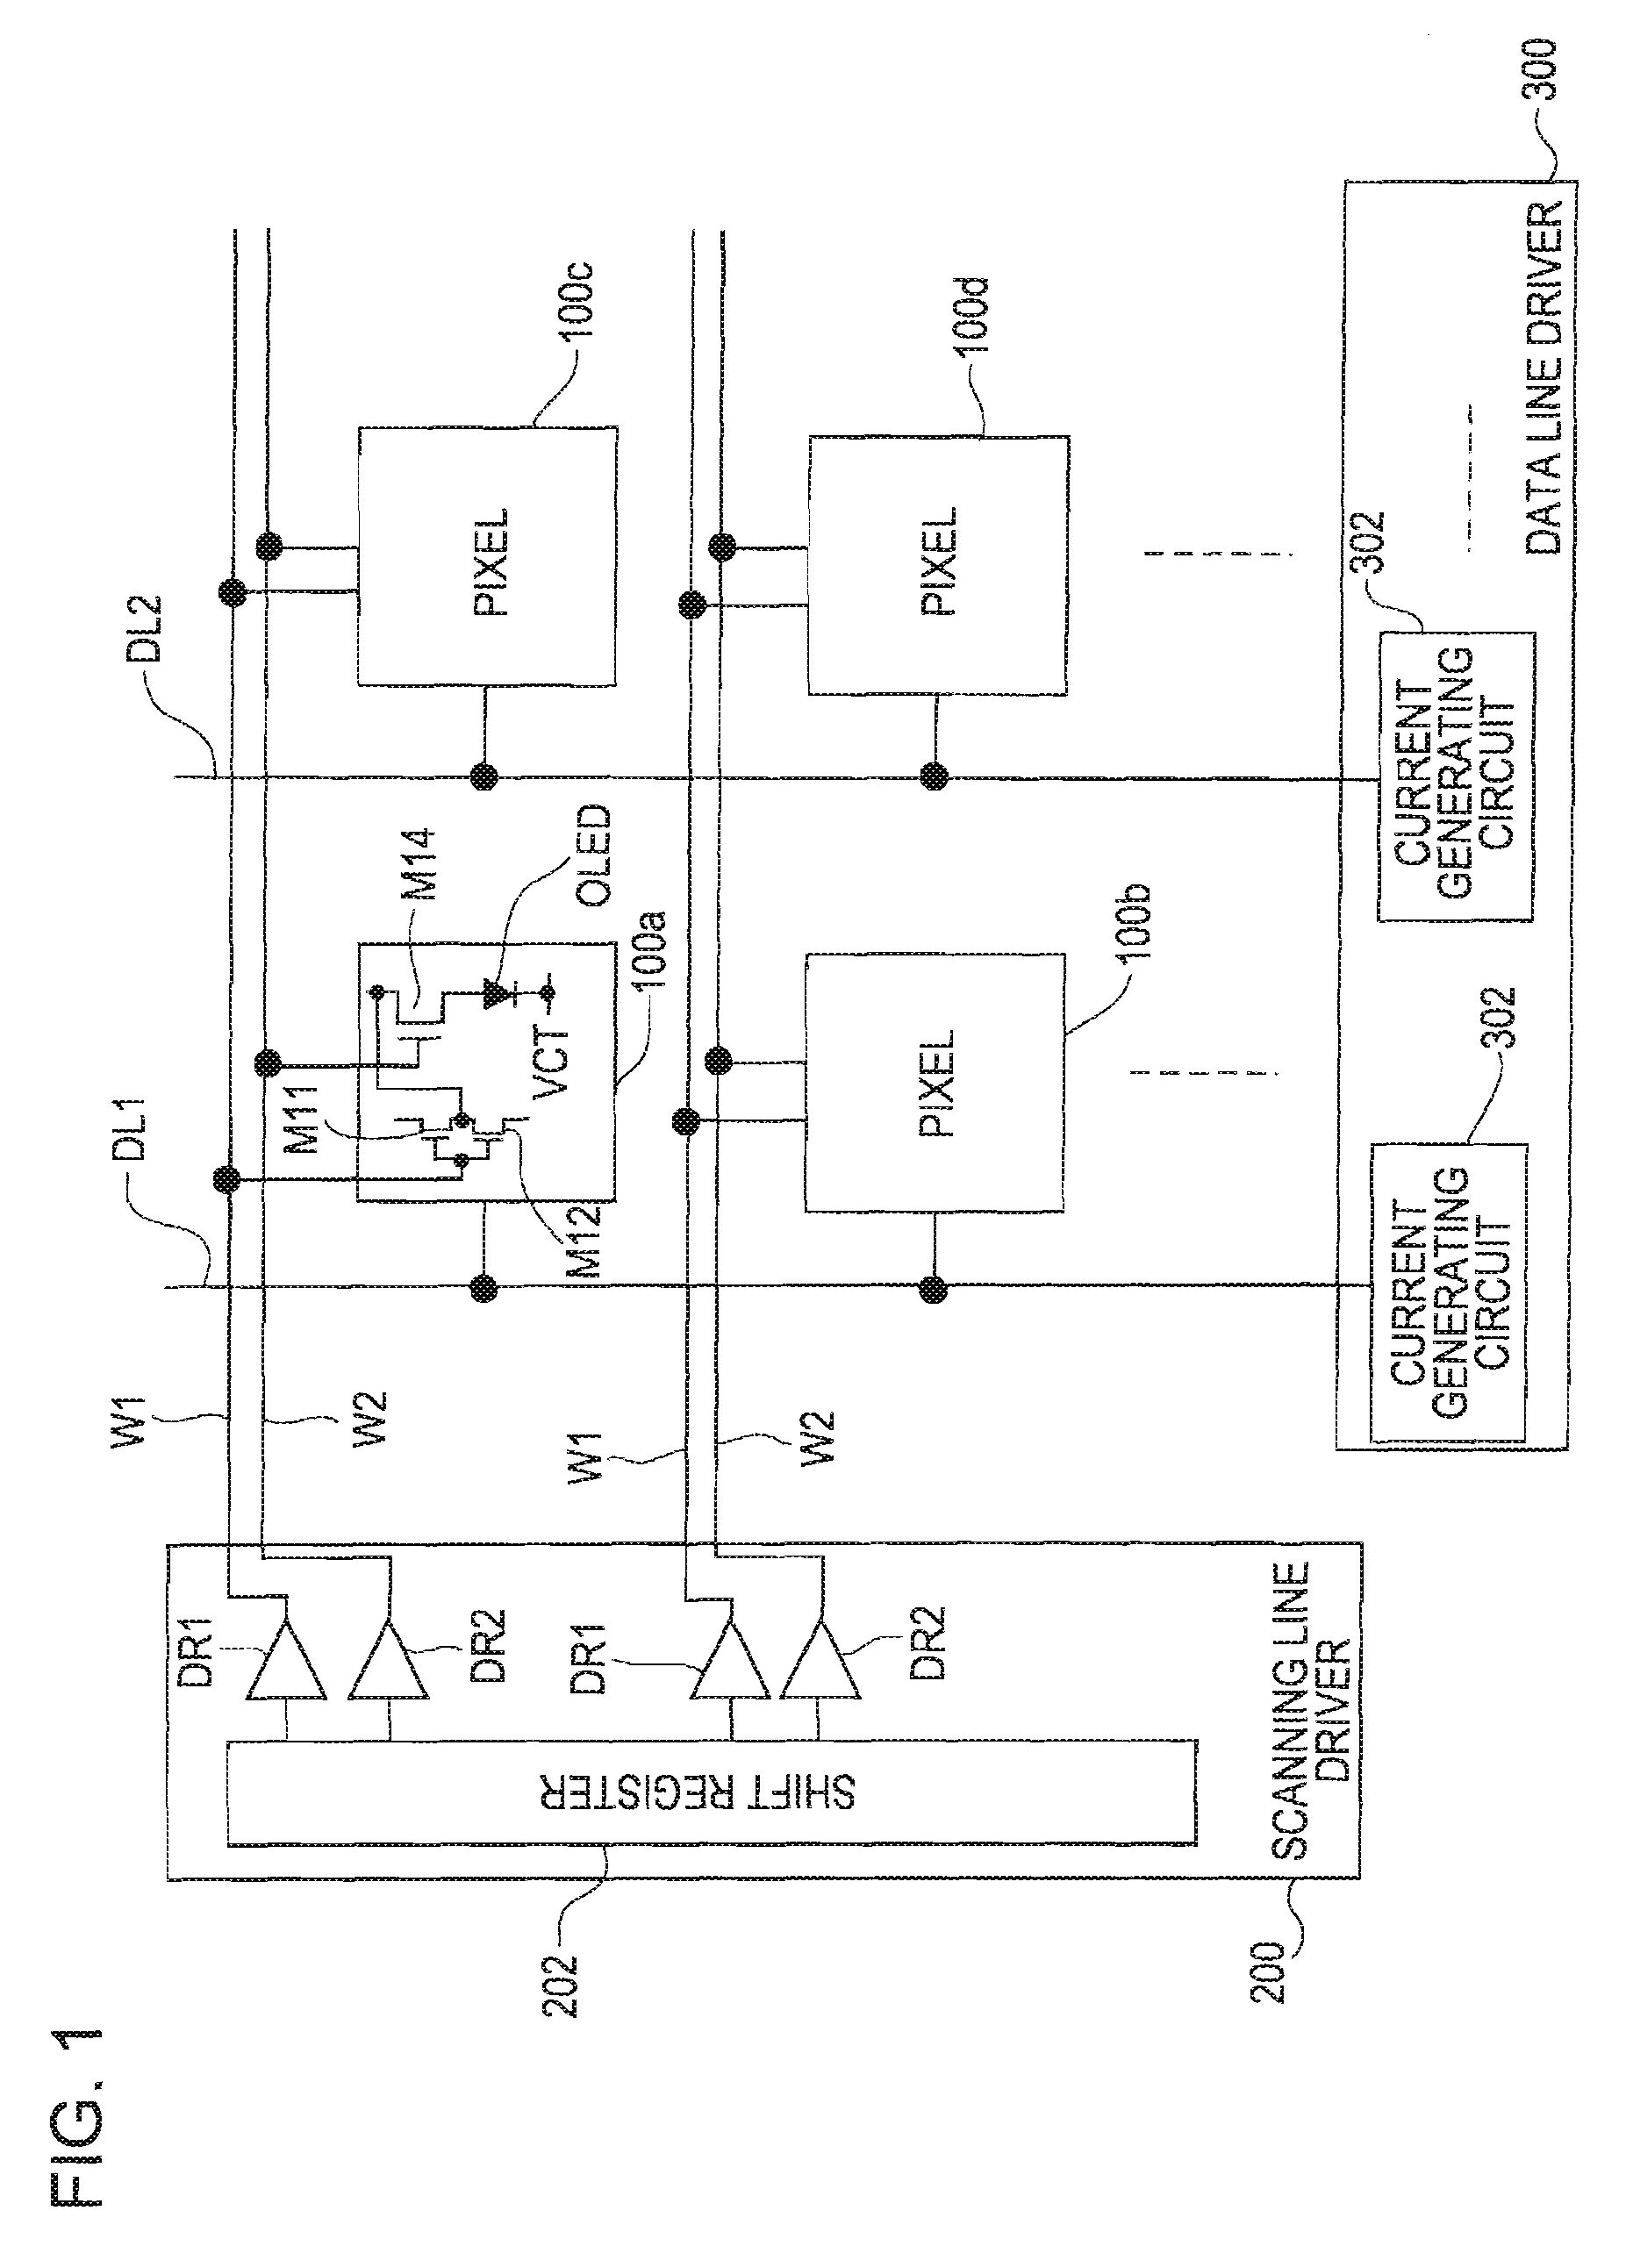 Active-matrix-type light-emitting device, electronic apparatus, and pixel driving method for active-matrix-type light-emitting device